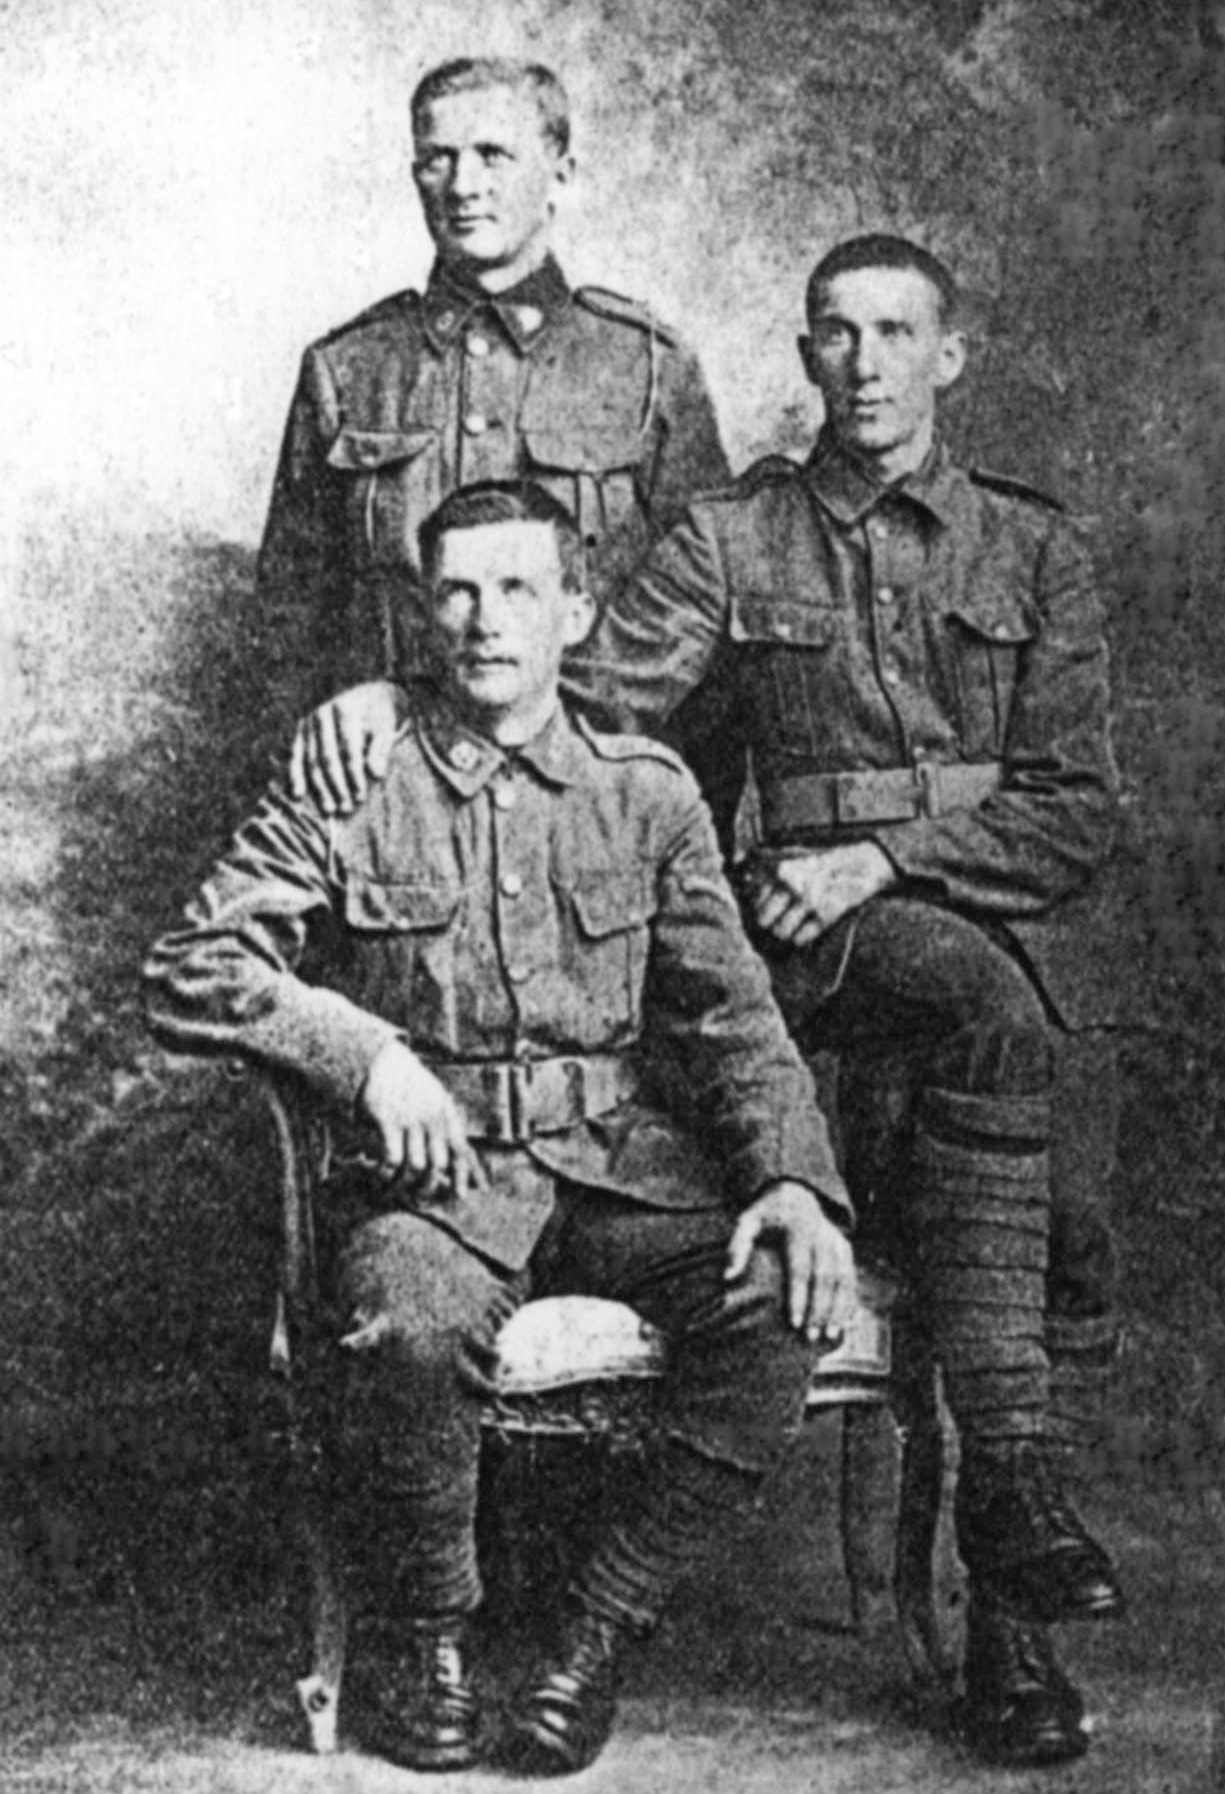 Private James Cairns (standing), Corporal David Cairns (sitting on left) and Private Robert Cairns (sitting on right – served under the alias Thomas Mitchell).